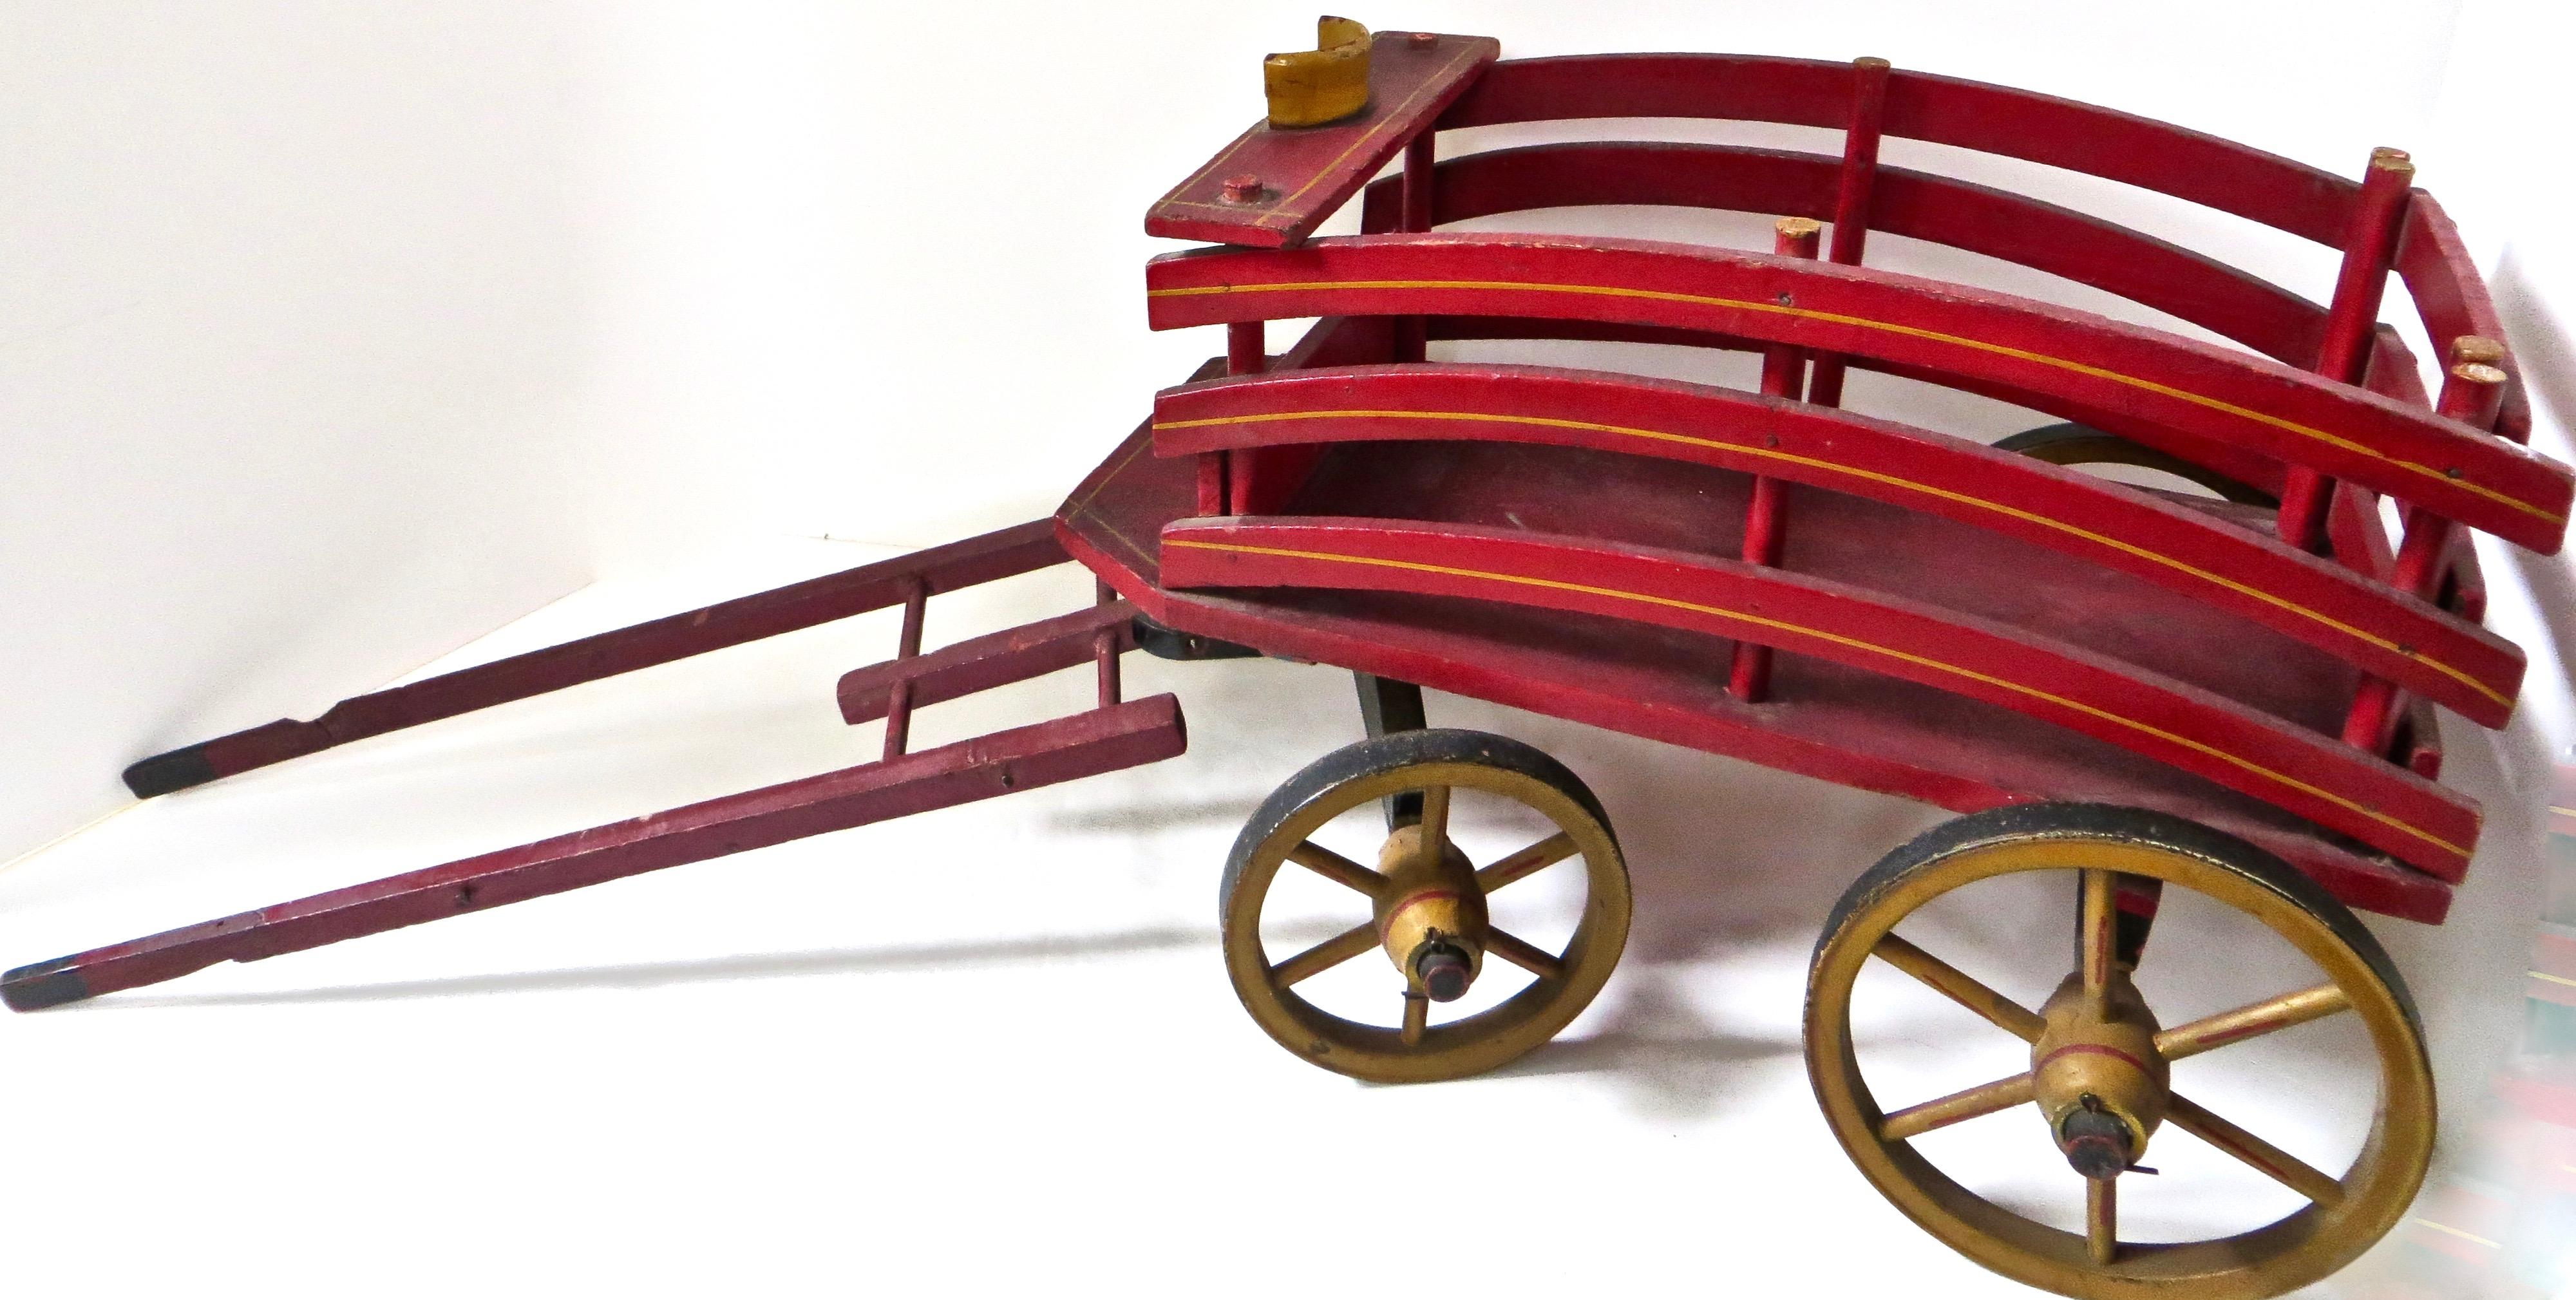 SALESMAN SAMPLE: Late 19th C. American (4) wheeled hand carved all wooden horse drawn hay wagon, in excellent condition with original gold stenciling to carriage, red stenciling to wheels; in authentic red paint. Metal wheel rims. Slight repair to